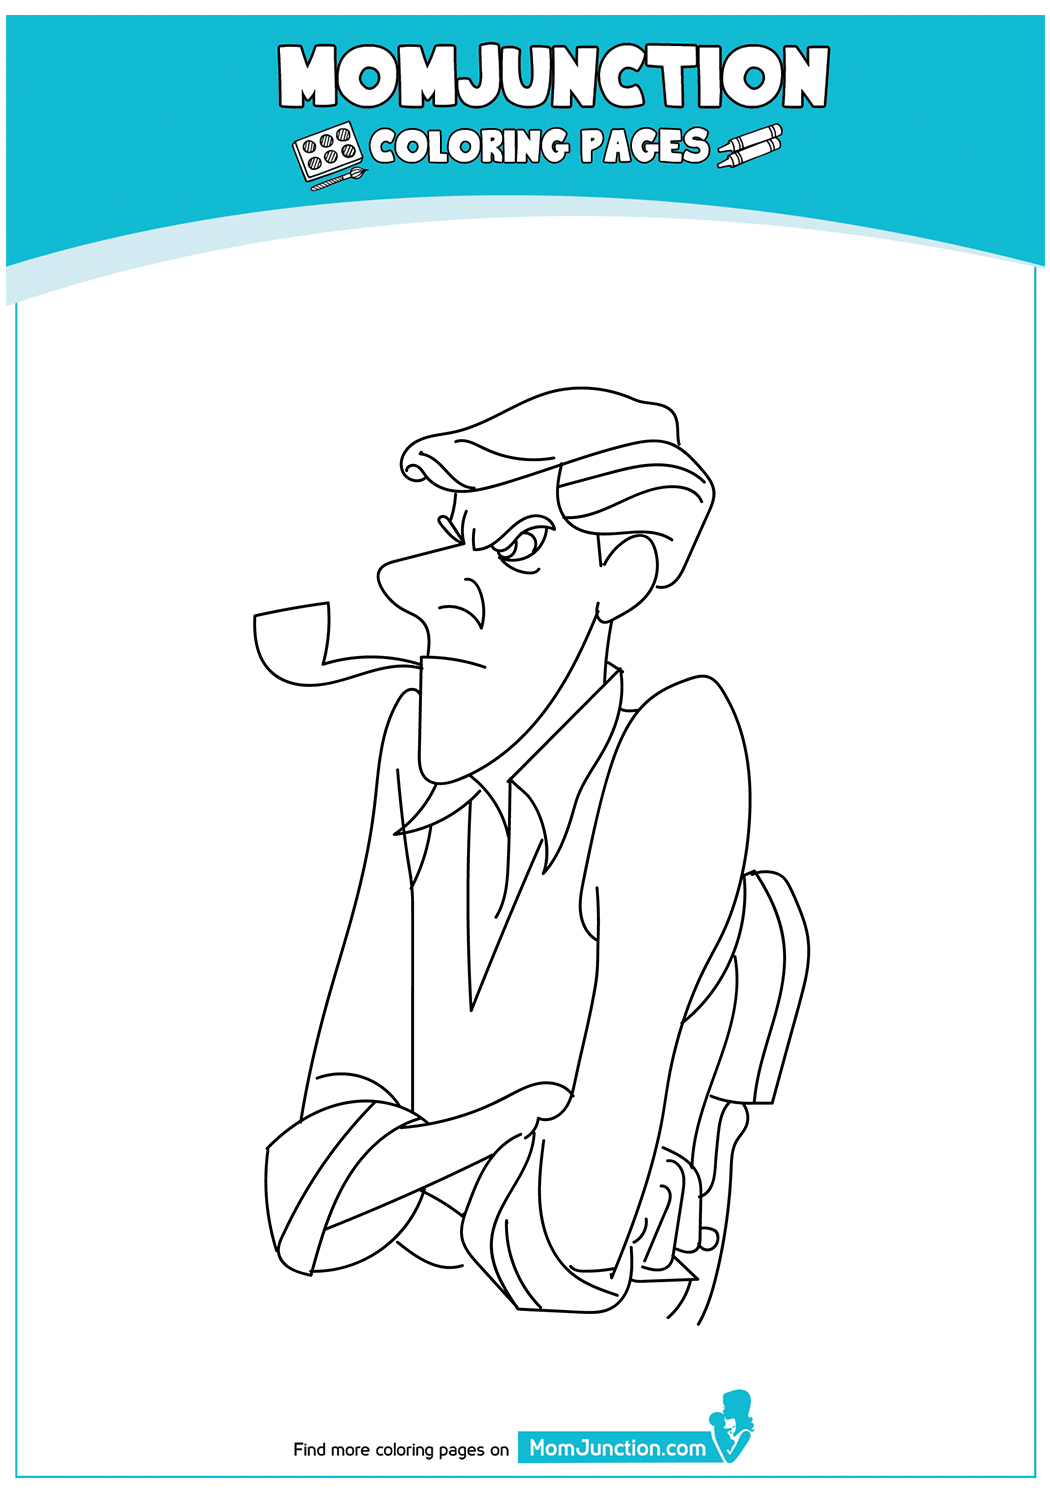 Stubborn Roger Coloring Page - Free Printable Coloring Pages for Kids